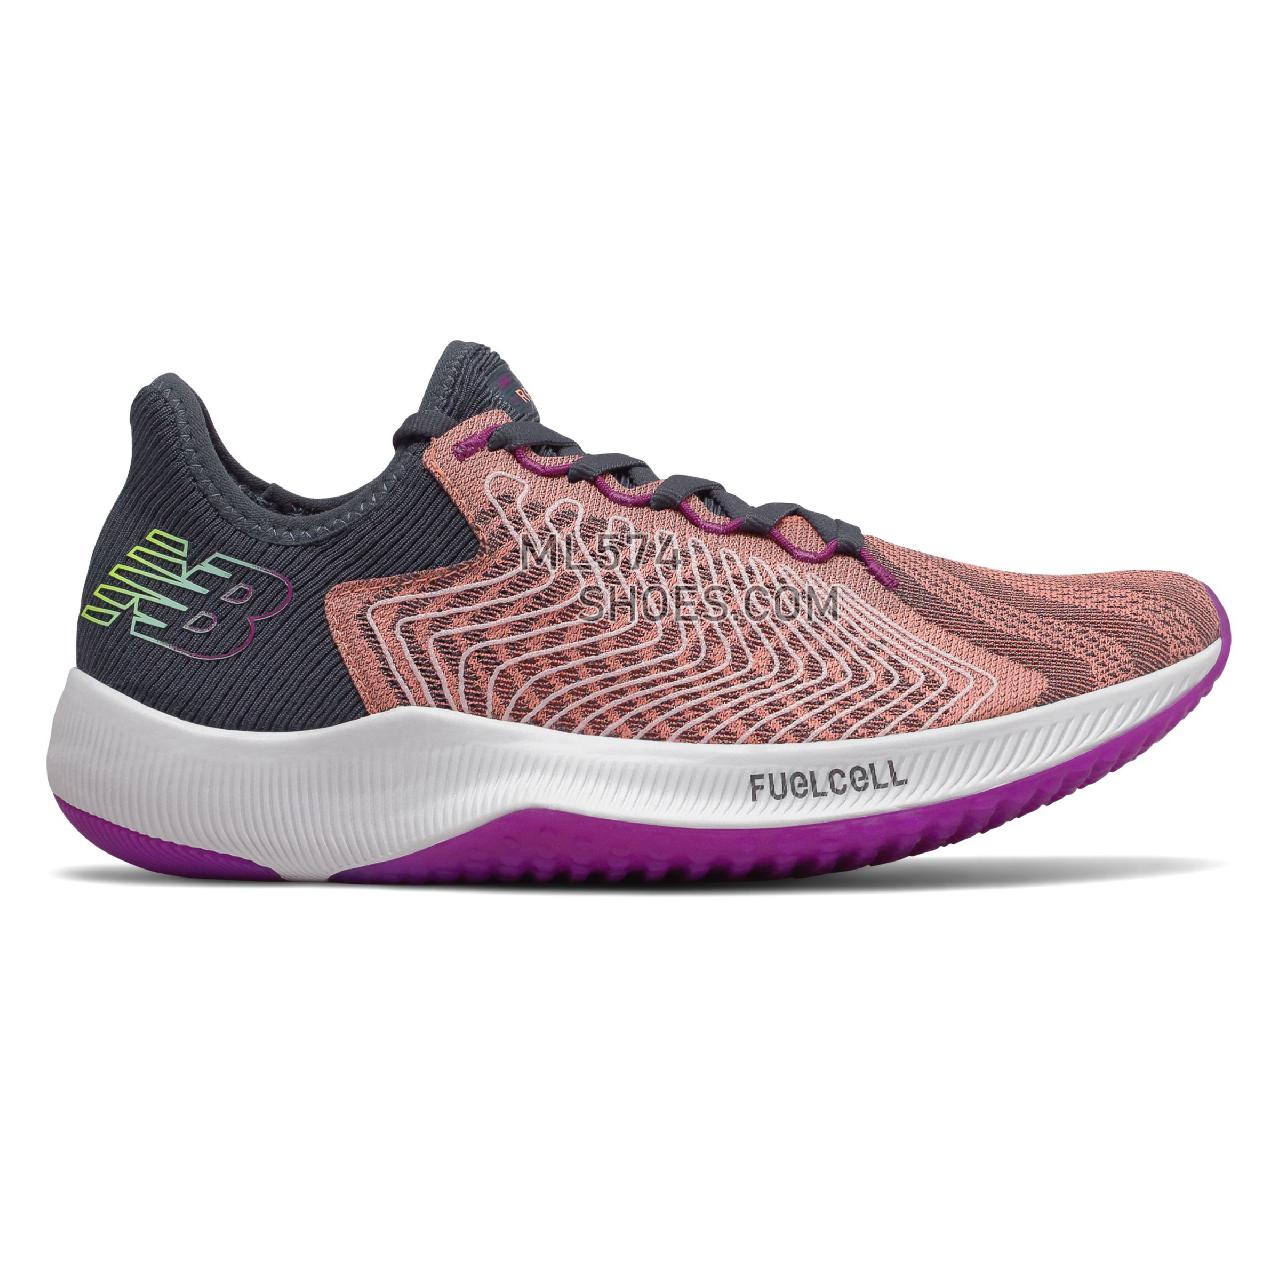 New Balance FuelCell Rebel - Women's Neutral Running - Ginger Pink with White and Black - WFCXPG